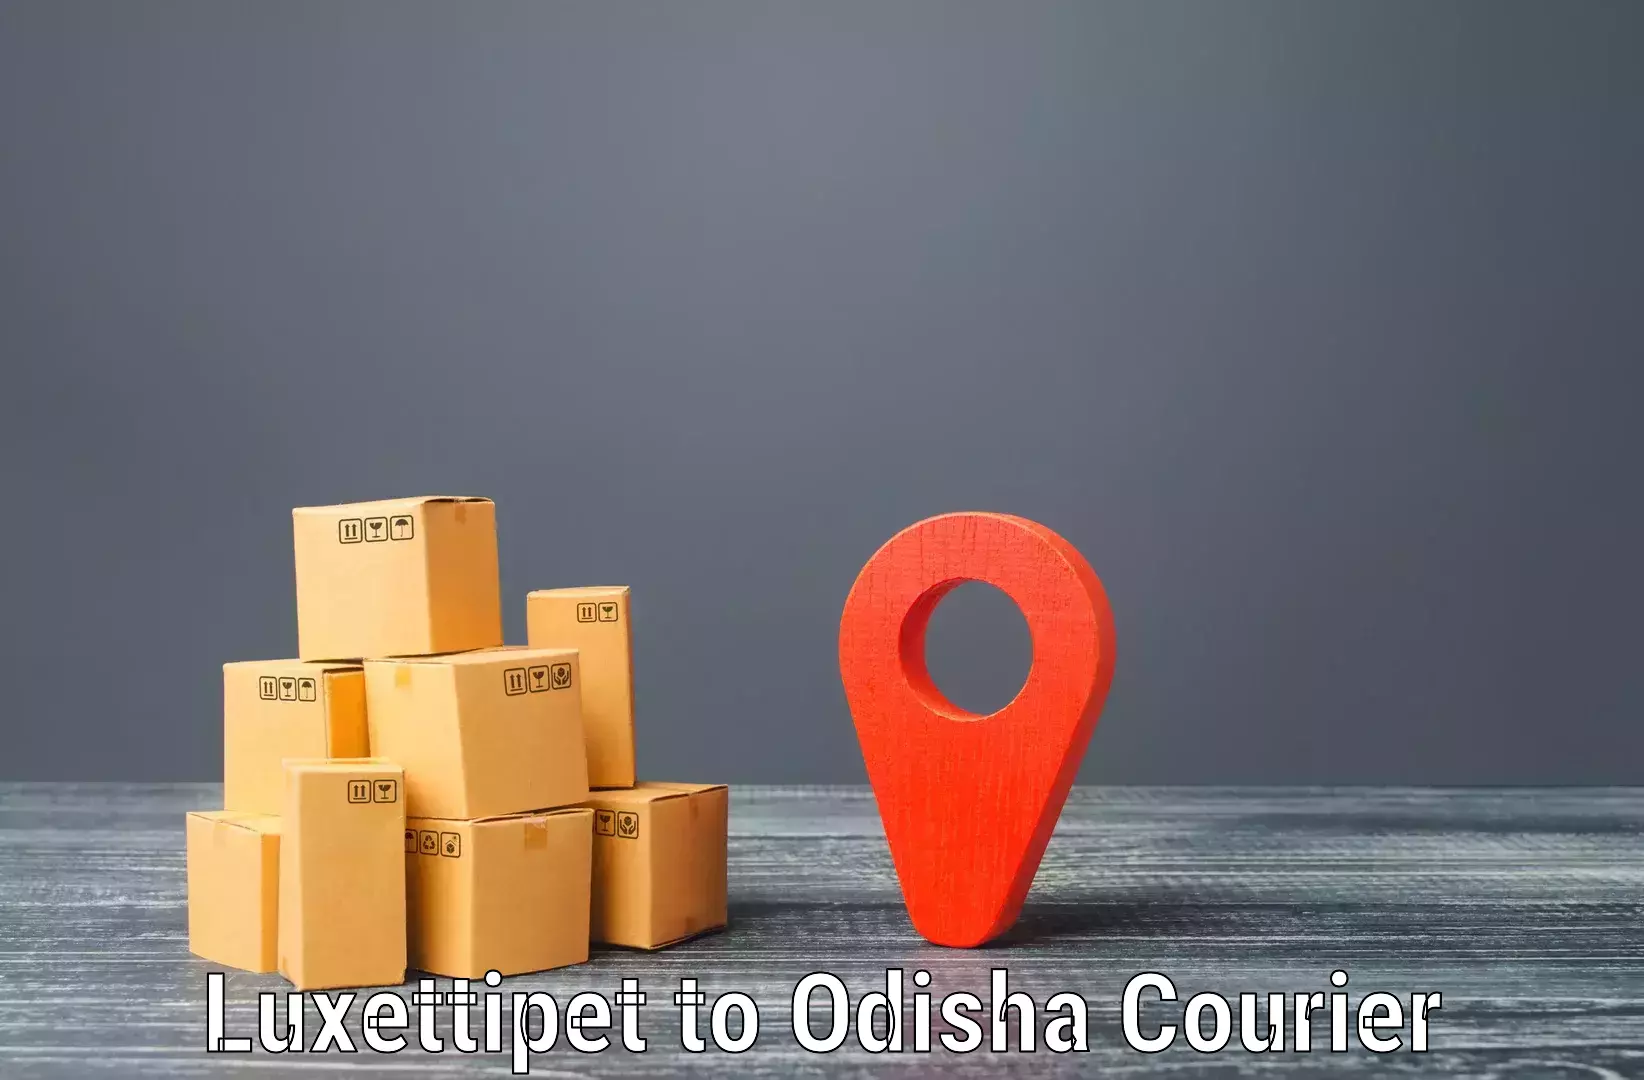 Customer-oriented courier services Luxettipet to Kupari